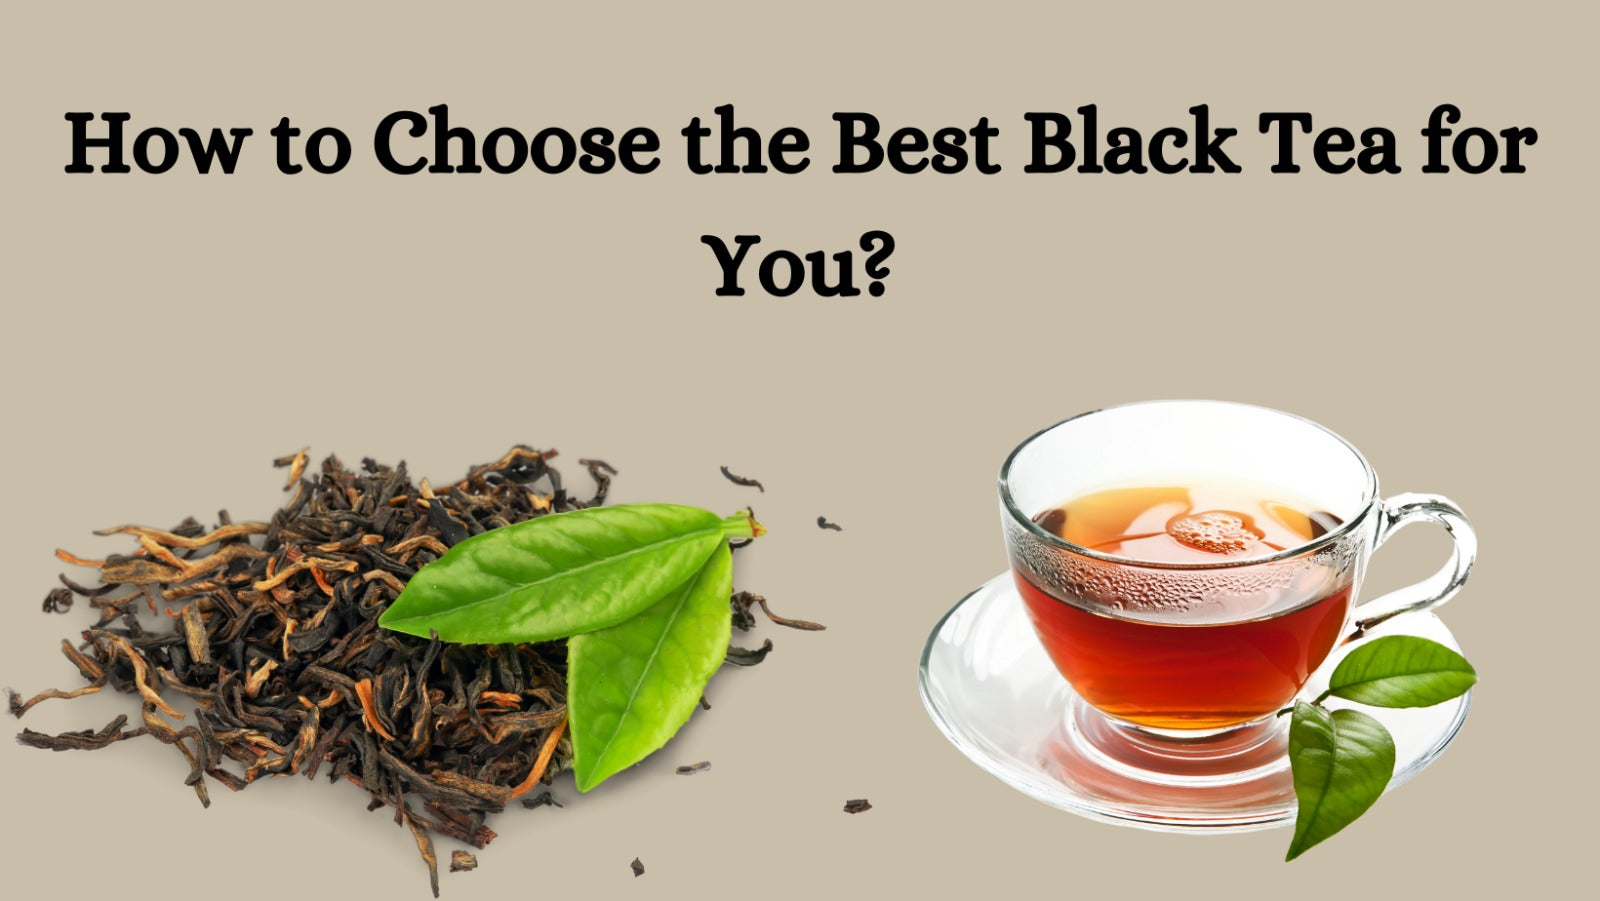 How to Choose the Best Black Tea for You?